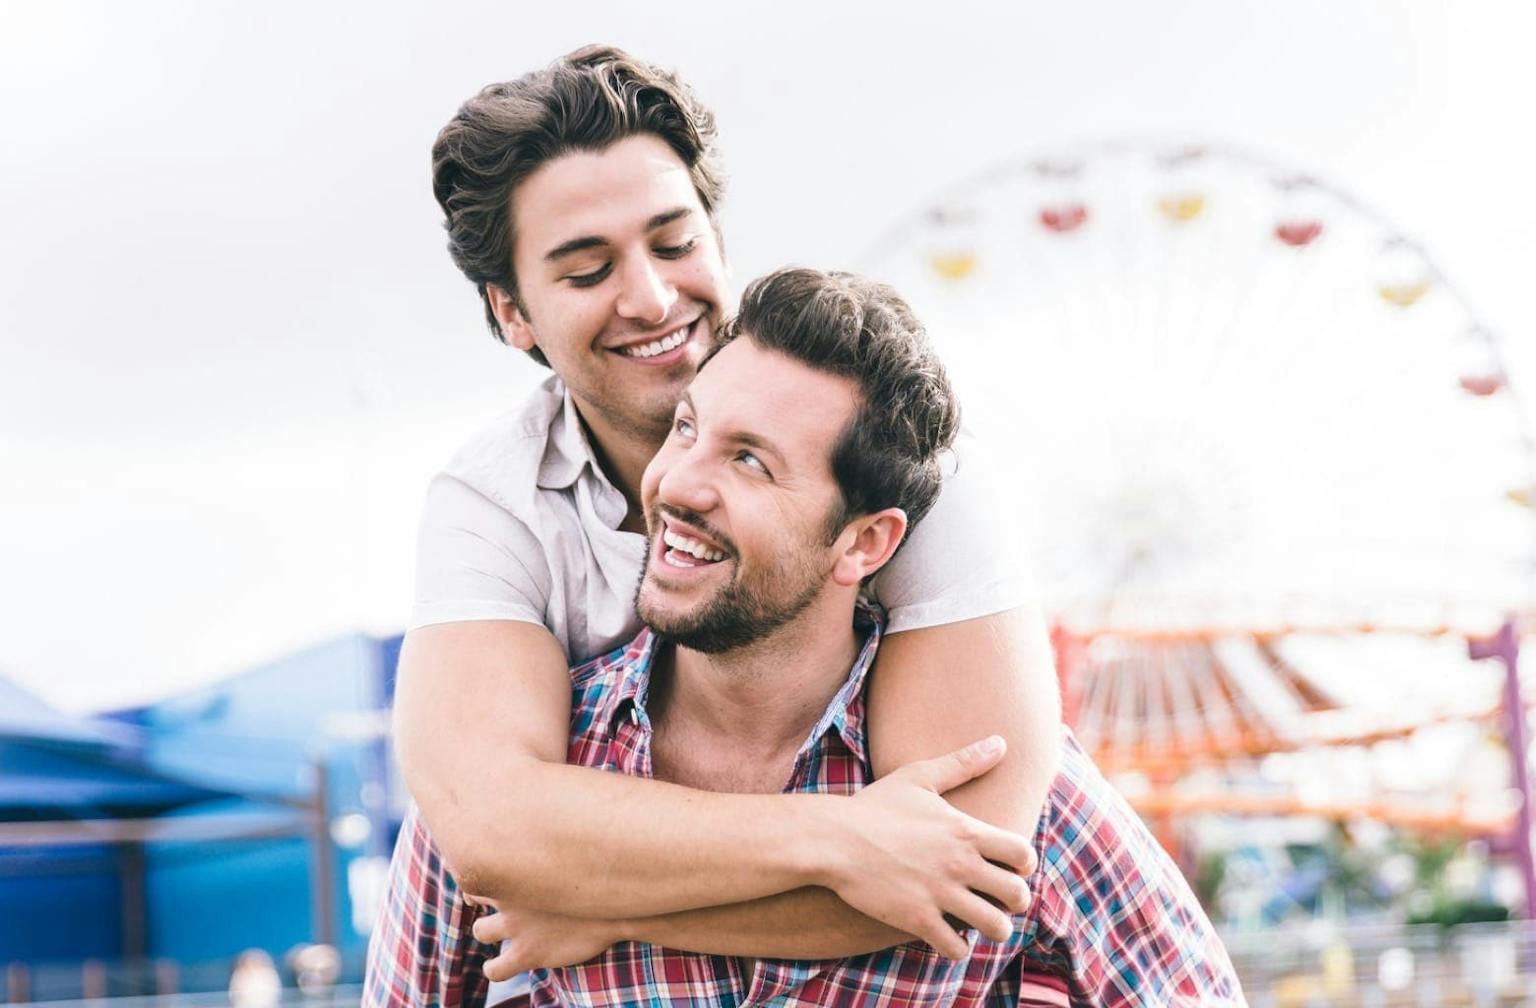 The 7 Best Gay Hookup Apps You Didn’t Know Existed